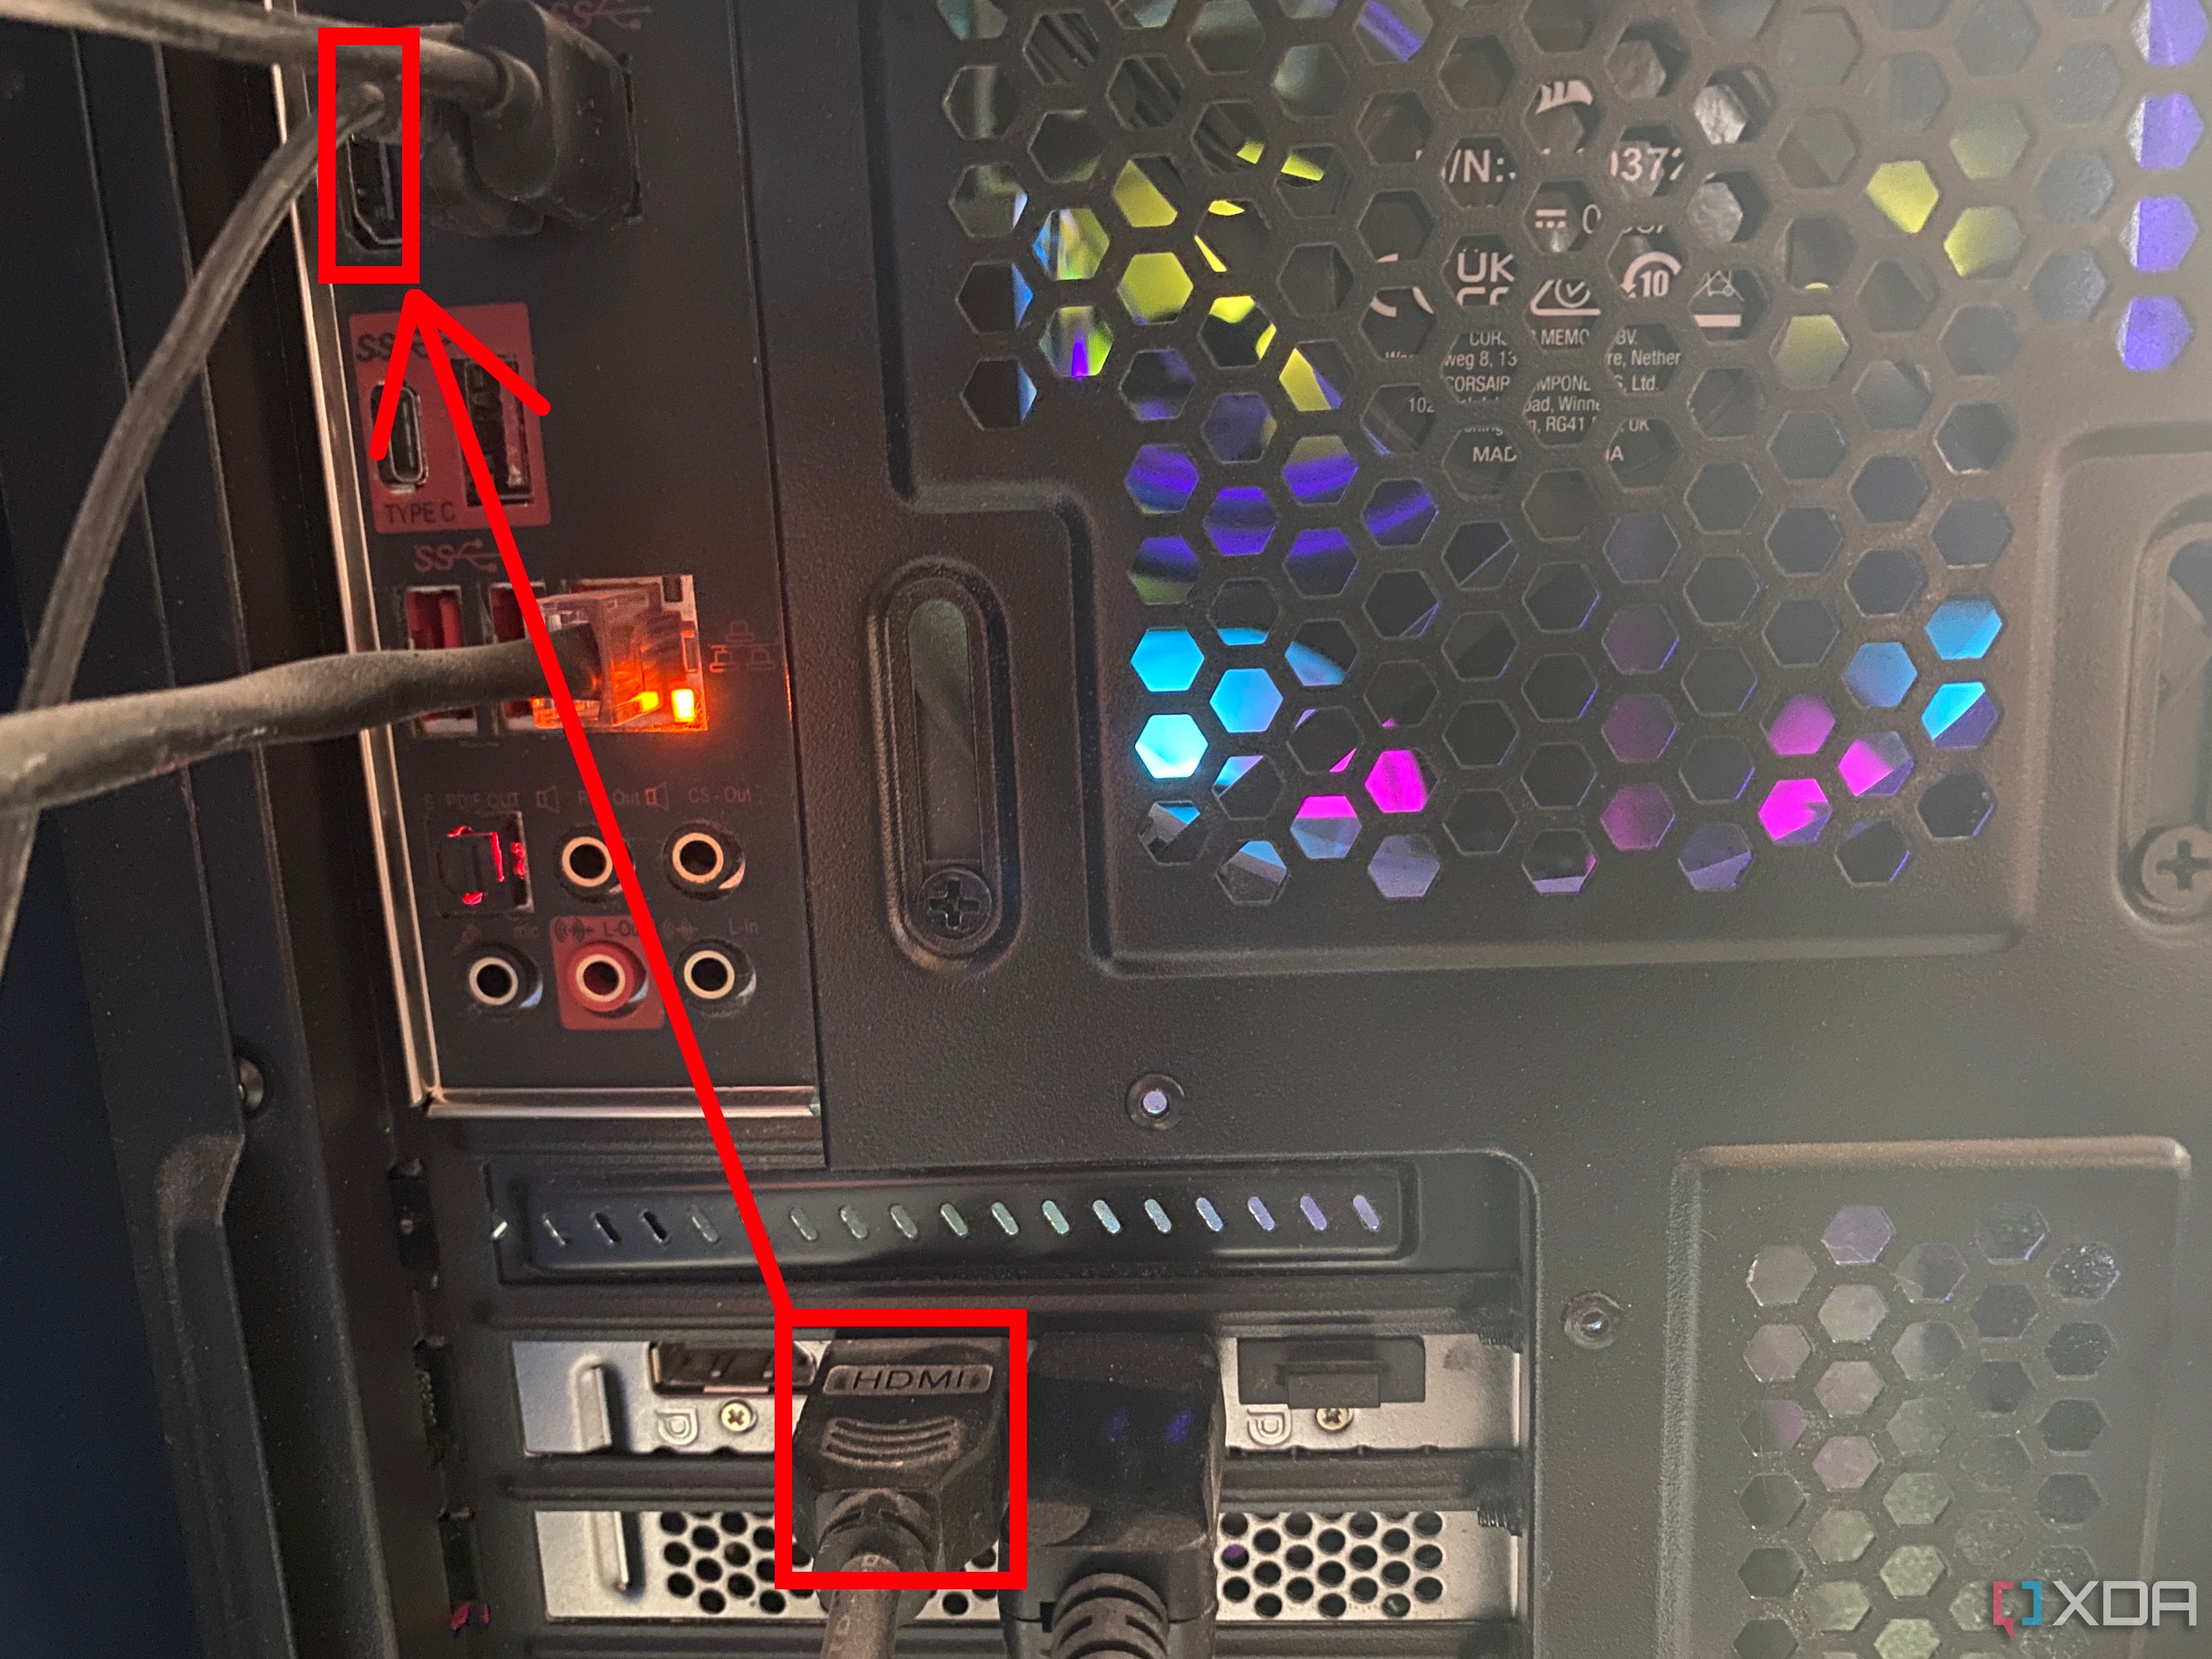 Move HDMI from GPU to motherboard connector